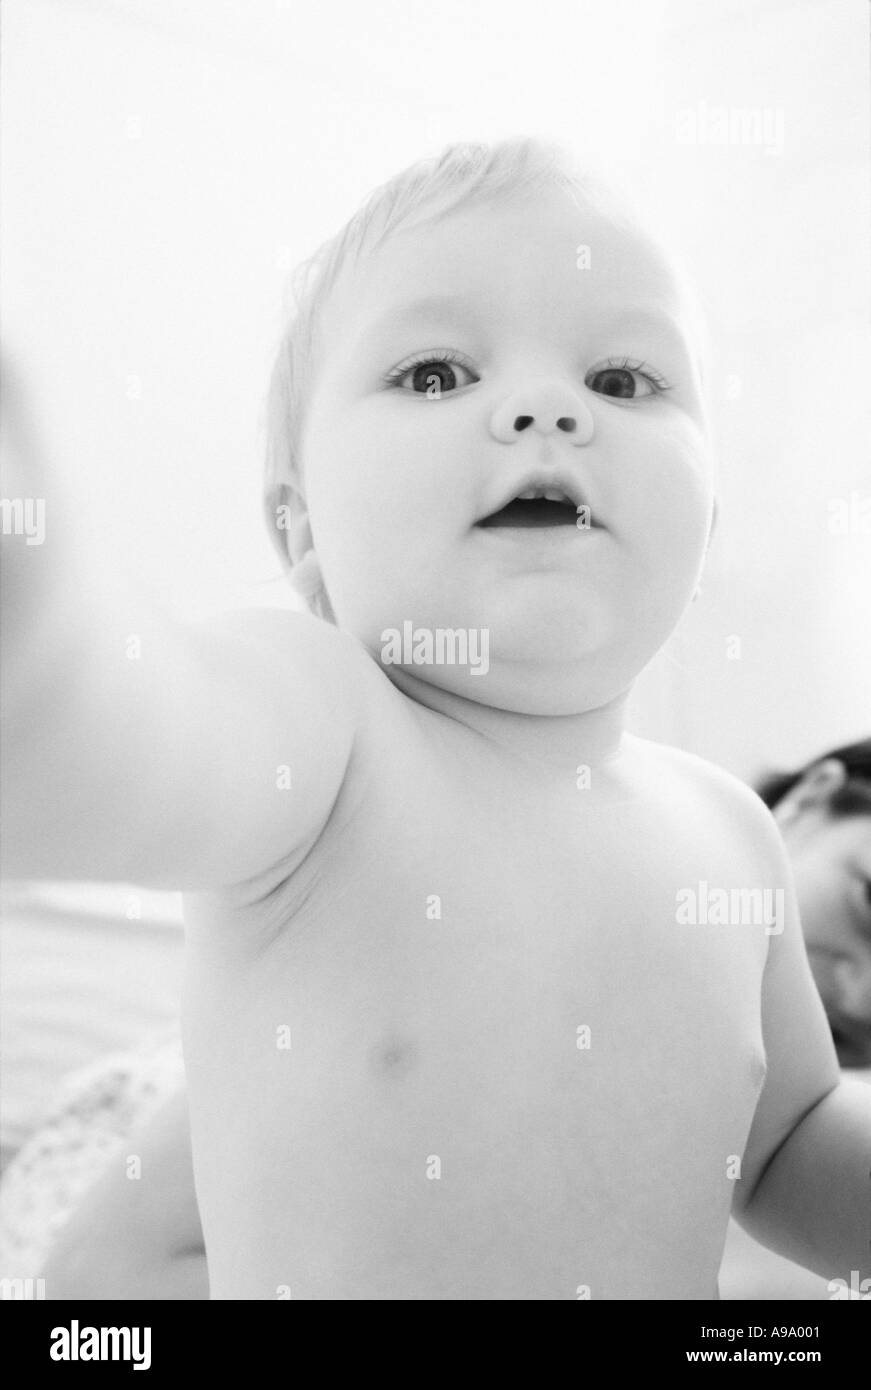 Baby reaching up Black and White Stock Photos & Images - Alamy